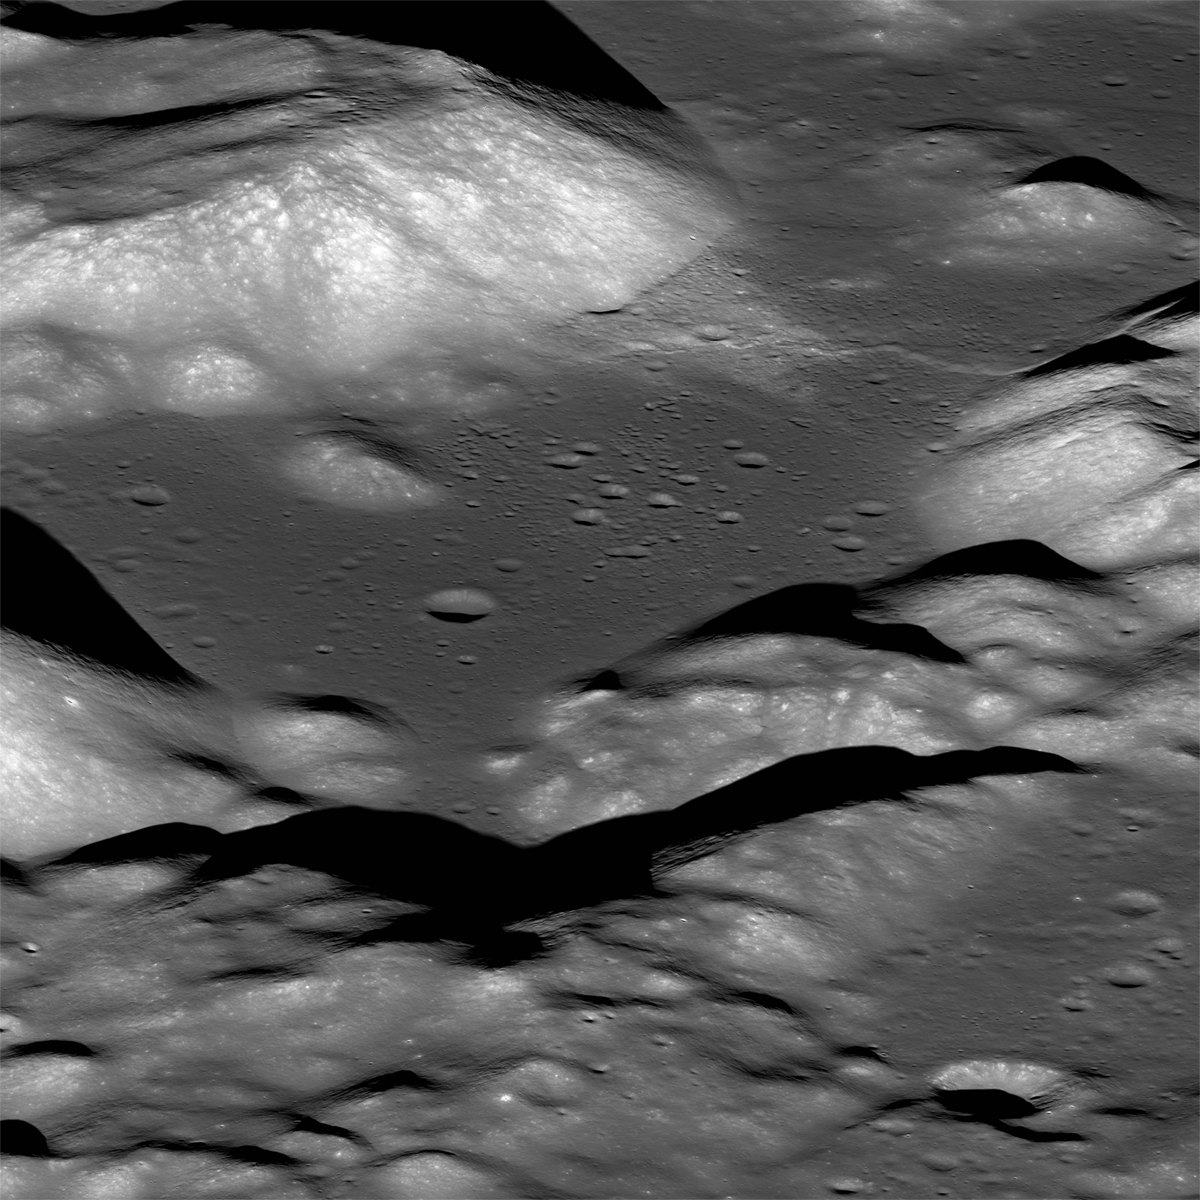 Approach to Taurus Littrow Valley